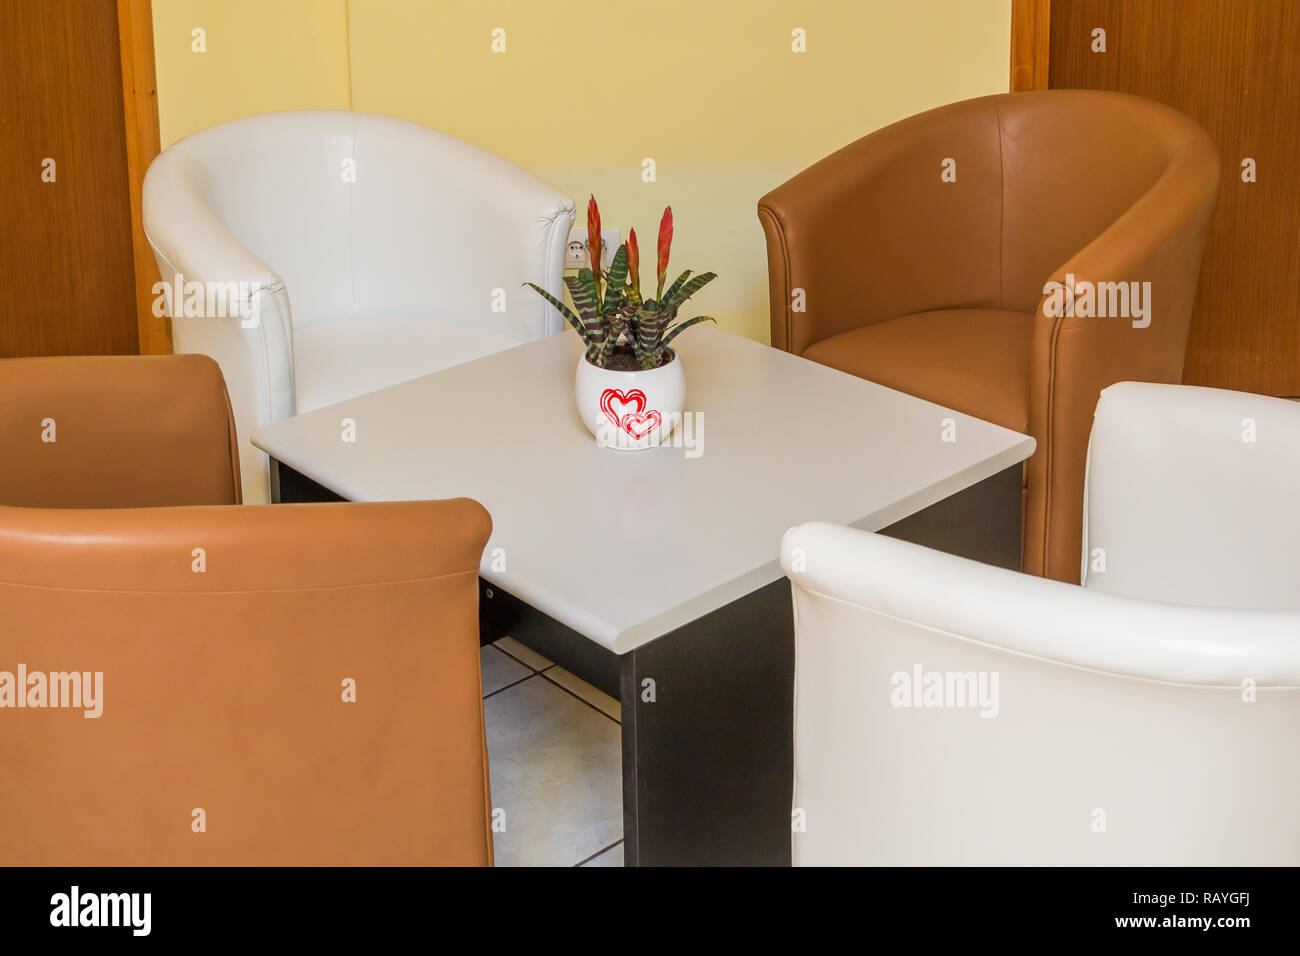 Four white and brown leather armchairs and coffee table with flower pot on the middle on the table. Stock Photo